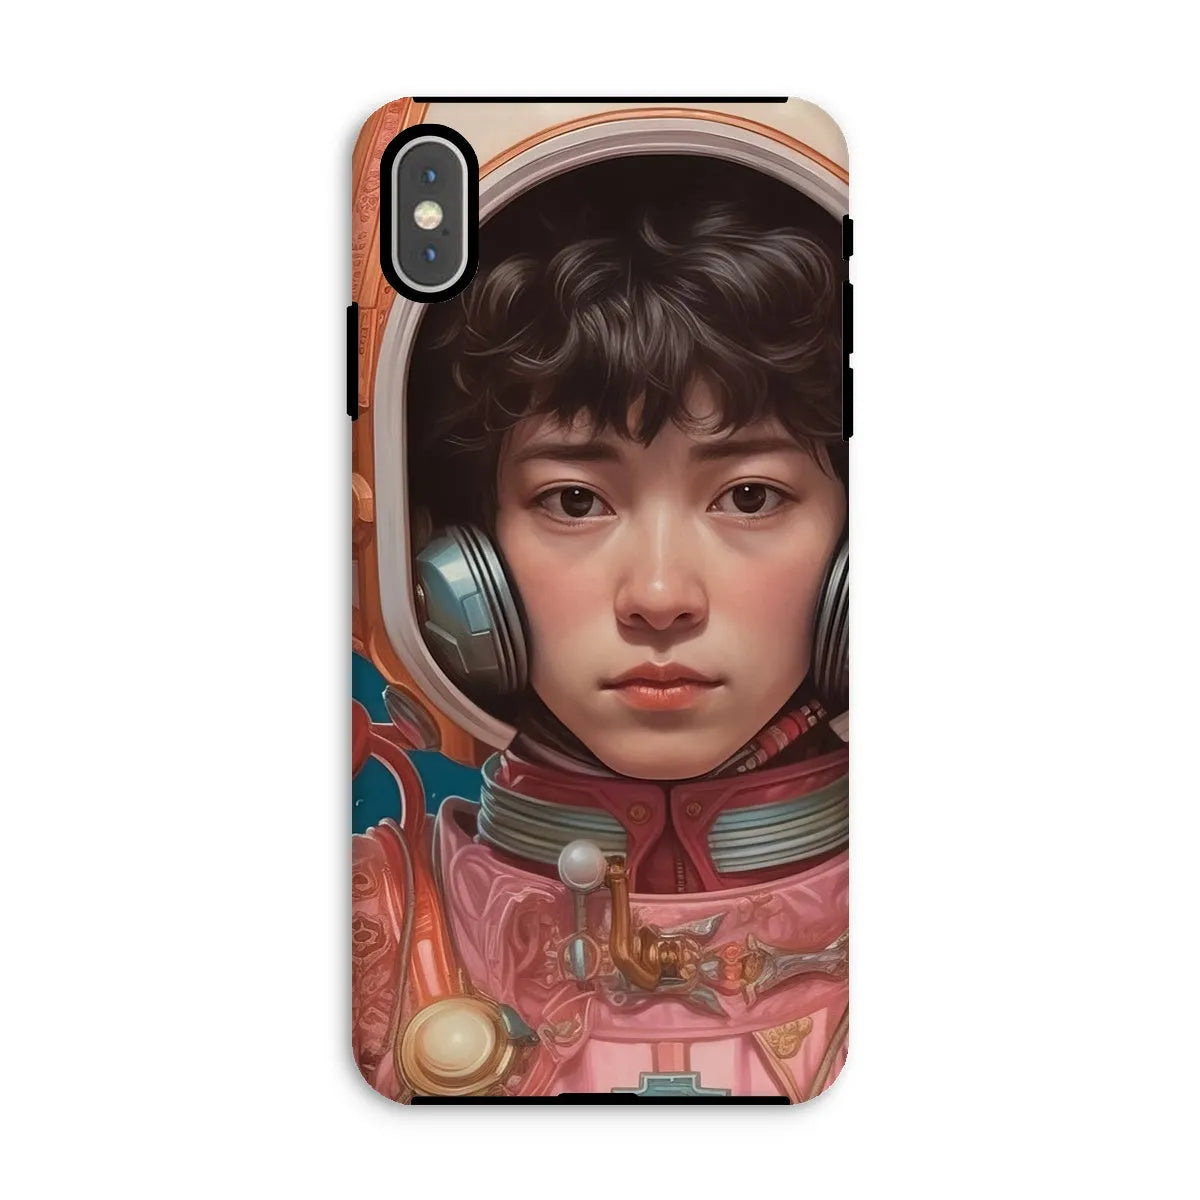 Kaito The Gay Astronaut - Lgbtq Art Phone Case - Iphone Xs Max / Matte - Mobile Phone Cases - Aesthetic Art